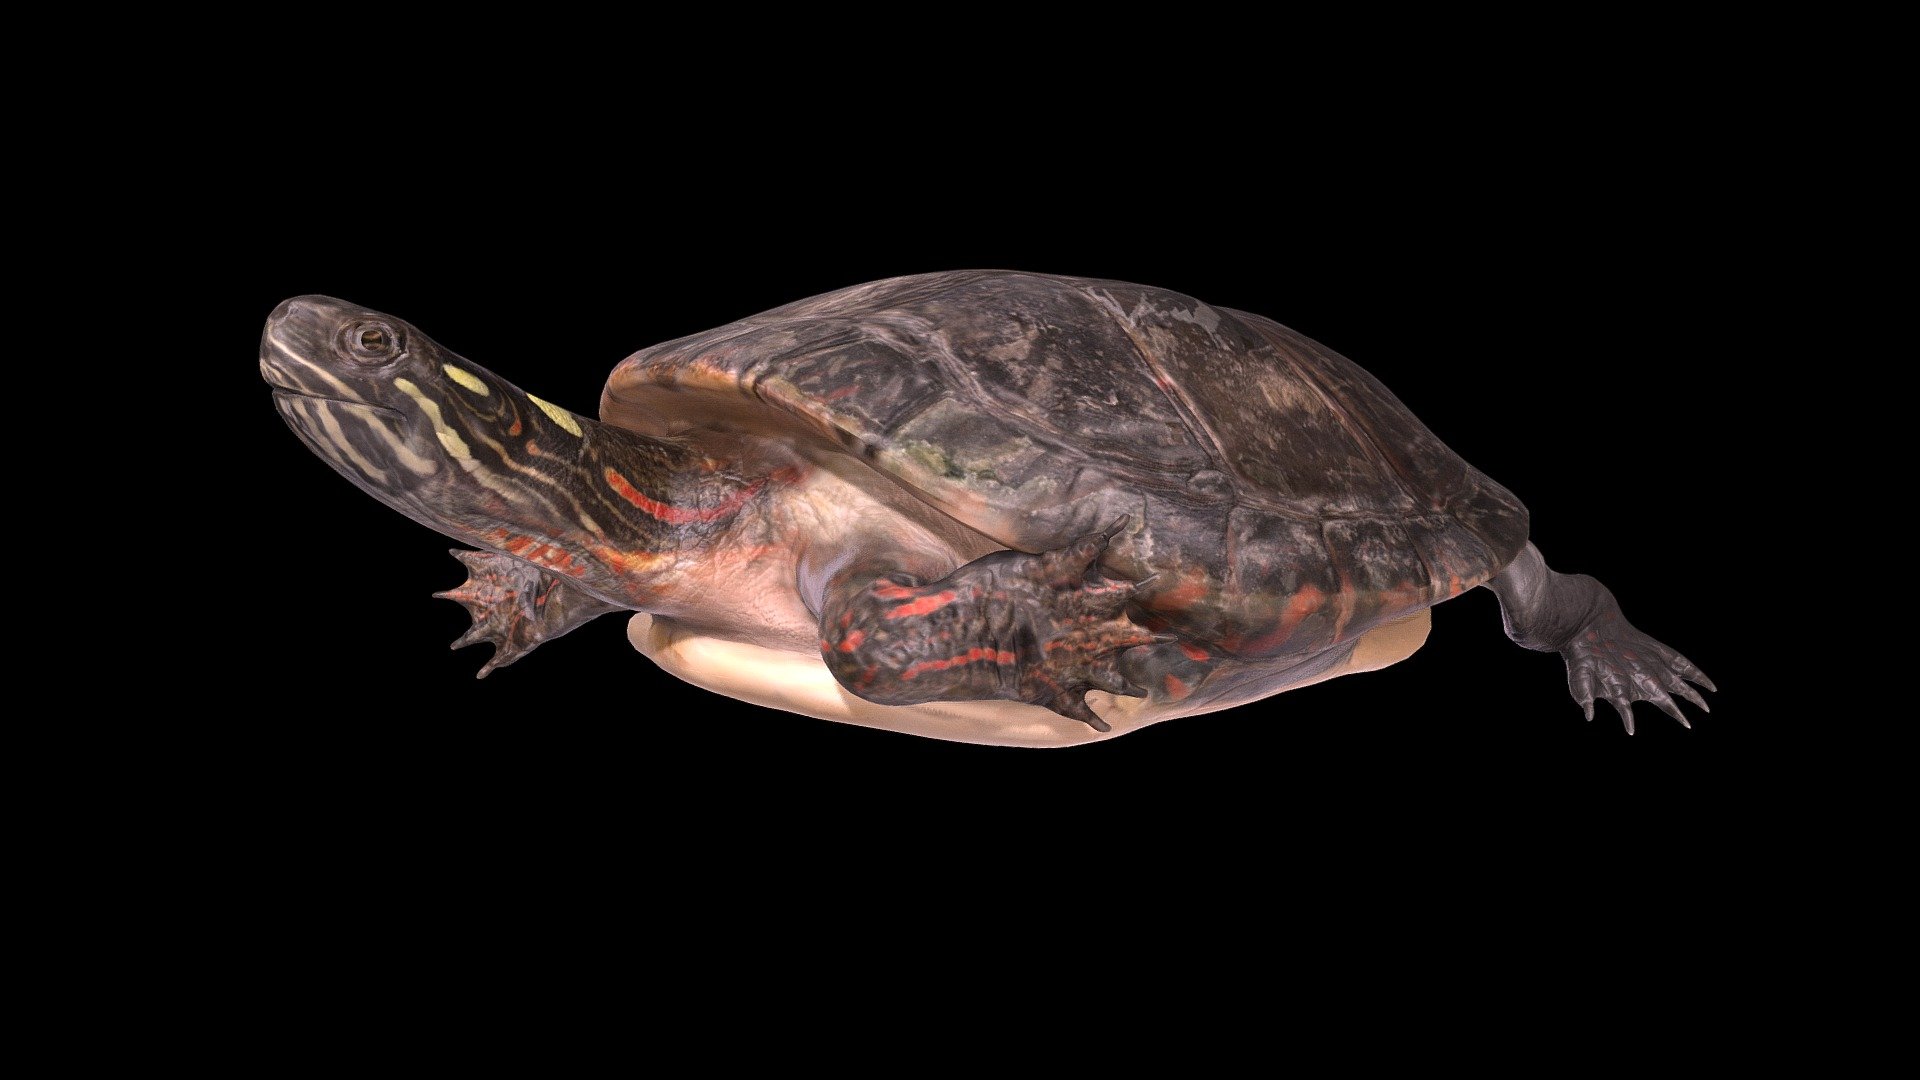 This is an animation of an adult Eastern Painted Turtle (Chrysemys picta).  This 3D model is a composite of two scans - one from an adult live Eastern Painted Turtle housed at the Maymont Nature Center (https://maymont.org/animals/nature-center/), and the other a preserved adult Eastern Painted Turtle from the Natural History Collection at the University of Massachusetts at Amherst (https://bcrc.bio.umass.edu/nhc/home). 

CG artists Jer Bot, Johnson Martin and Robert Gutierrez used Blender to reconstruct the full  turtle from these scans, as well as animate the movements. Thanks to the Maymont Nature Center, the Richard Lewis Media Group (http://rlmg.com/), and the Natural History Collection for facilitating the work.  

Downloads are freely available for creative and non-profit use. To inquire about licensing, please visit www.digitallife3d.org 3d model